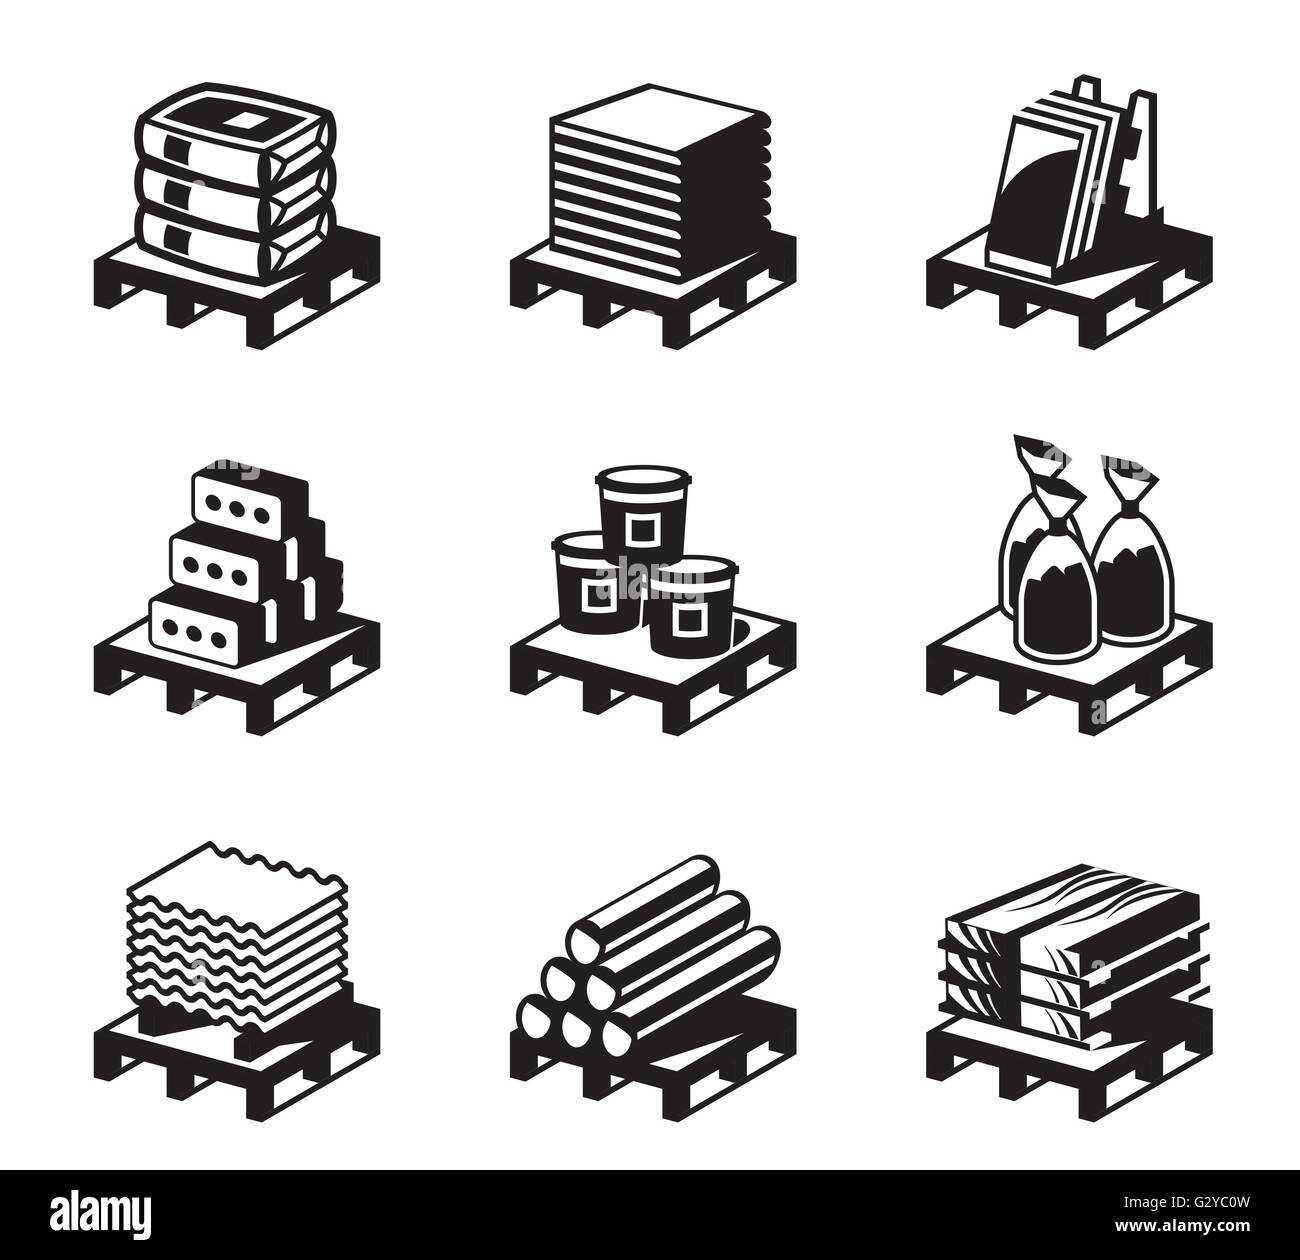 Building and construction materials - vector illustration Stock Vector